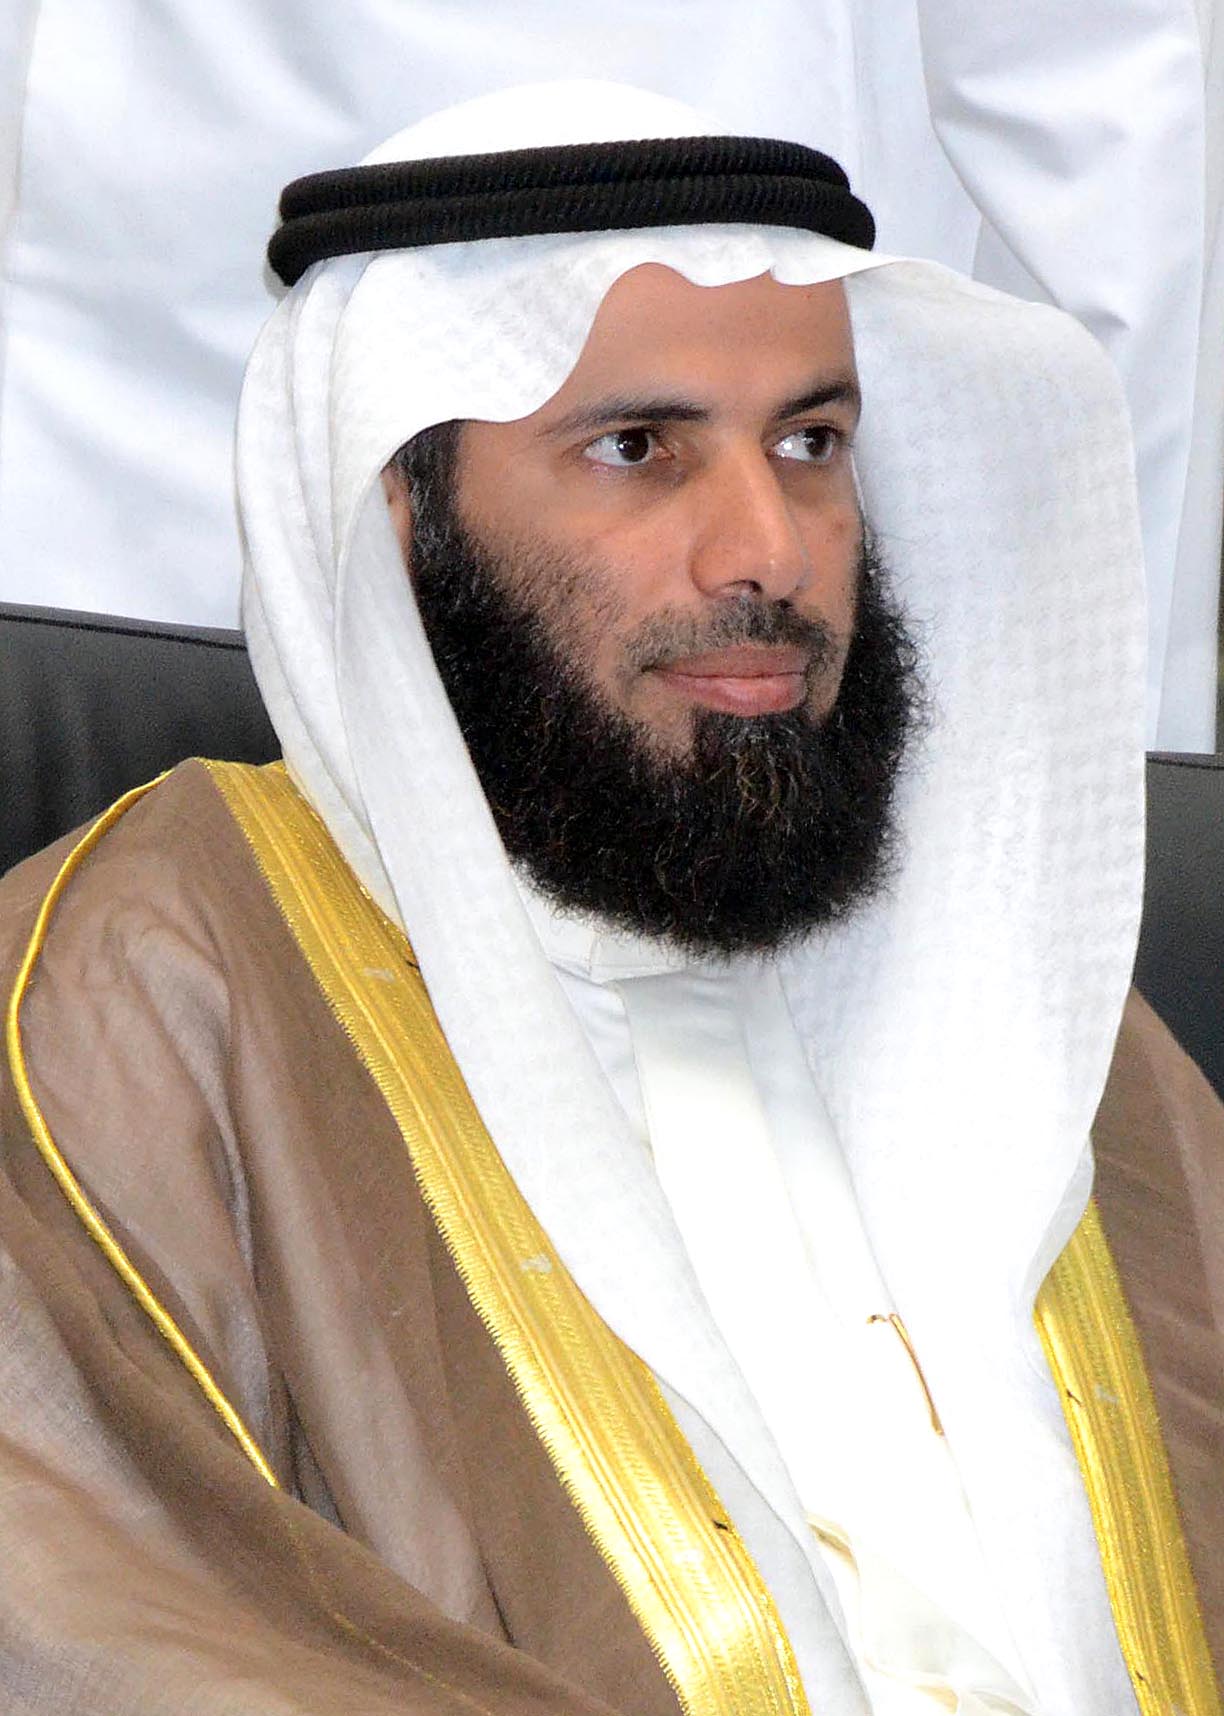 Minister of Justice and Minister of Endowments and Islamic Affairs Dr. Nayef Al-Ajmi